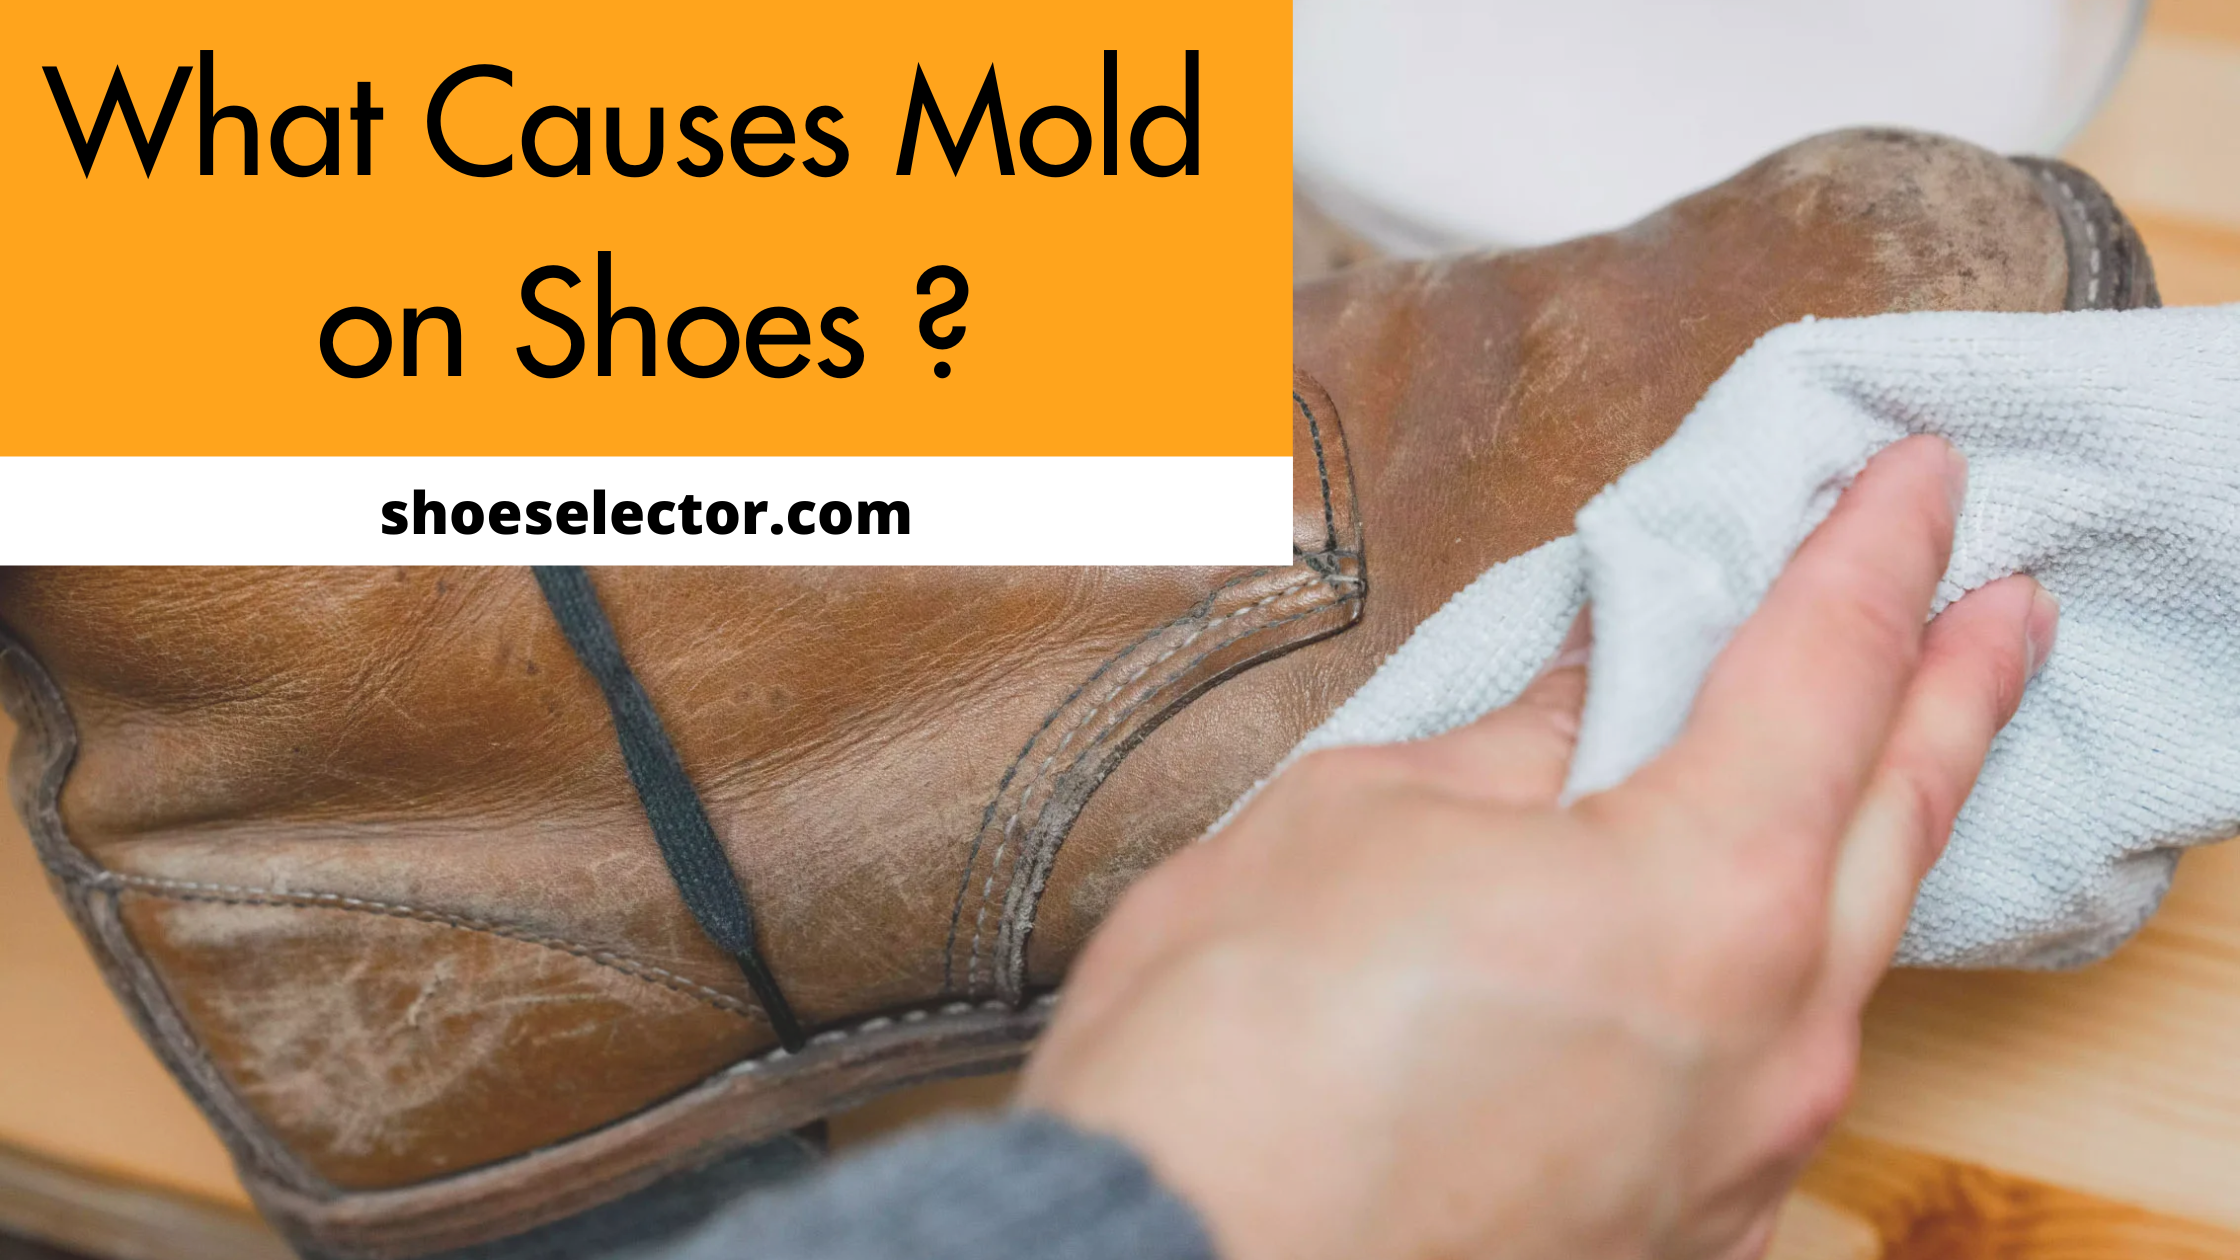 What Causes Mold On Shoes? Simple & Complete Guide